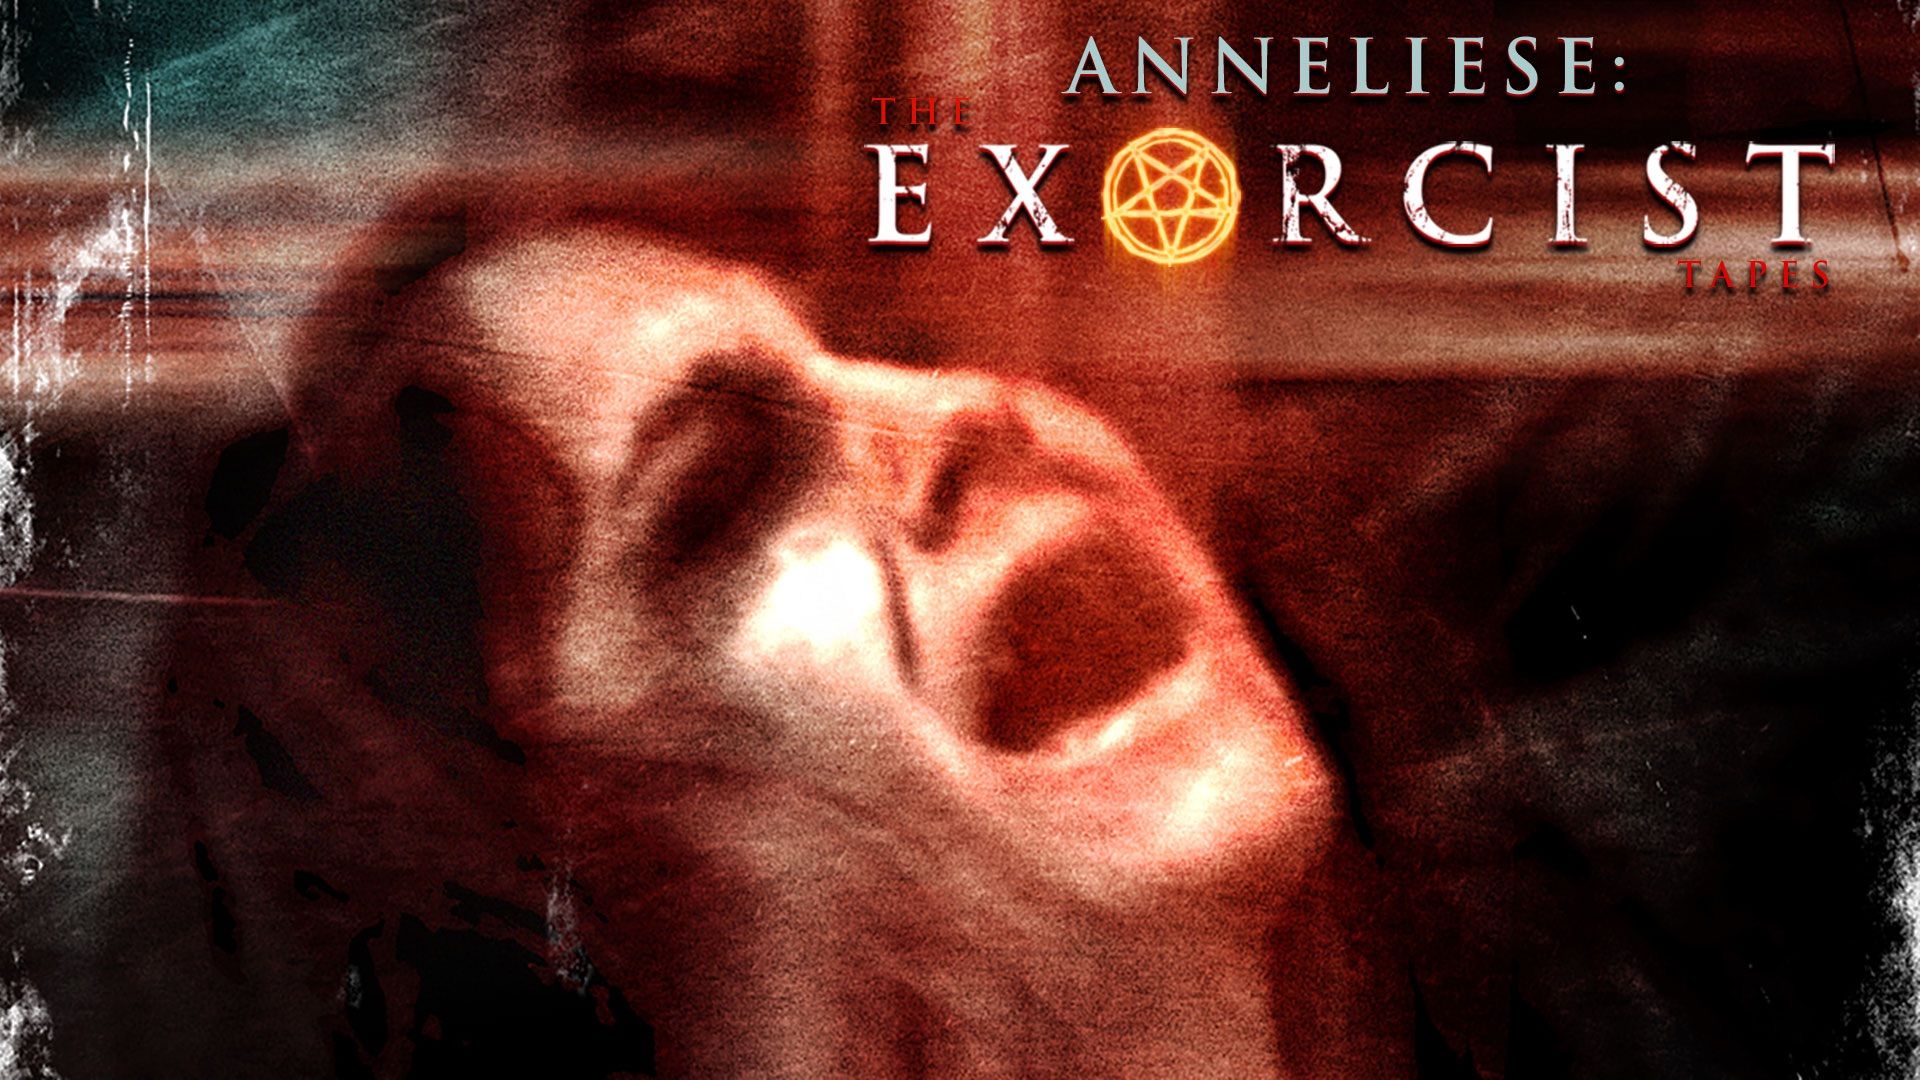 Anneliese: The Exorcist Tapes Backdrop